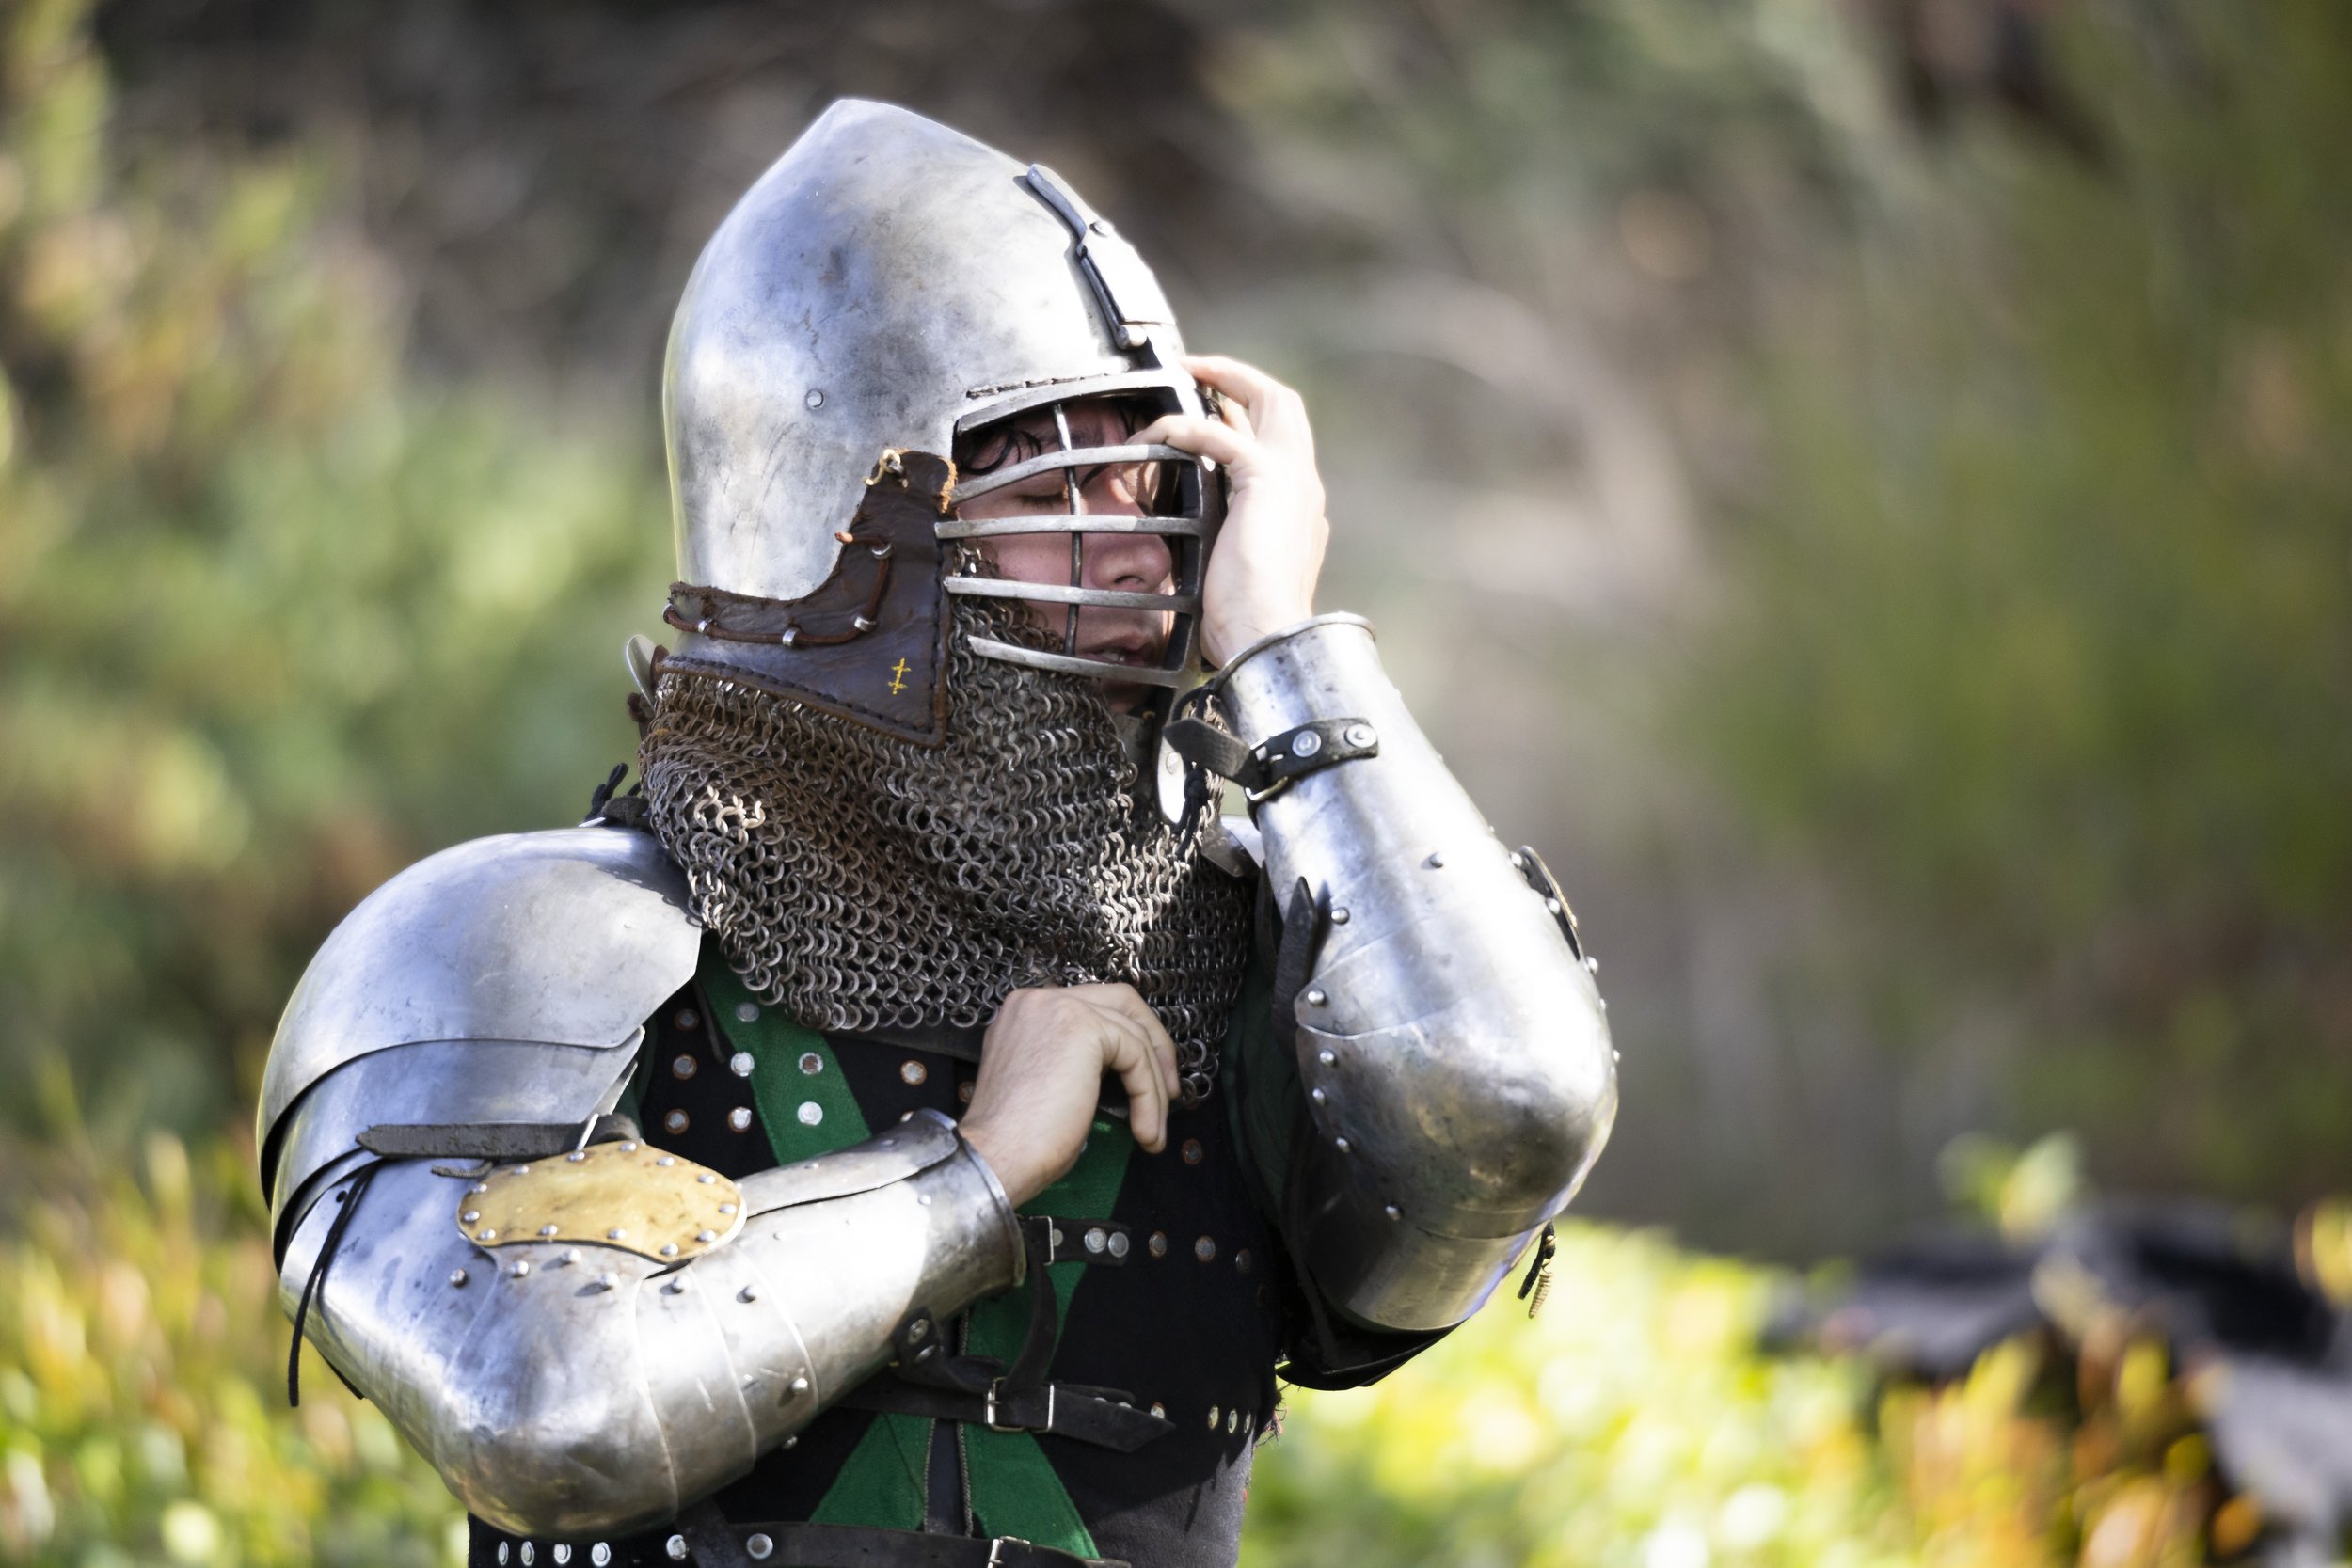  Joe Rodriguez, a member of the buhurt team Los Angeles Golden Knights, adjusts his helmet during team practice at Culver City Park in Culver City, Calif., on Saturday, Dec. 9, 2023. Buhurt, otherwise known as armored combat, is a full contact fighti